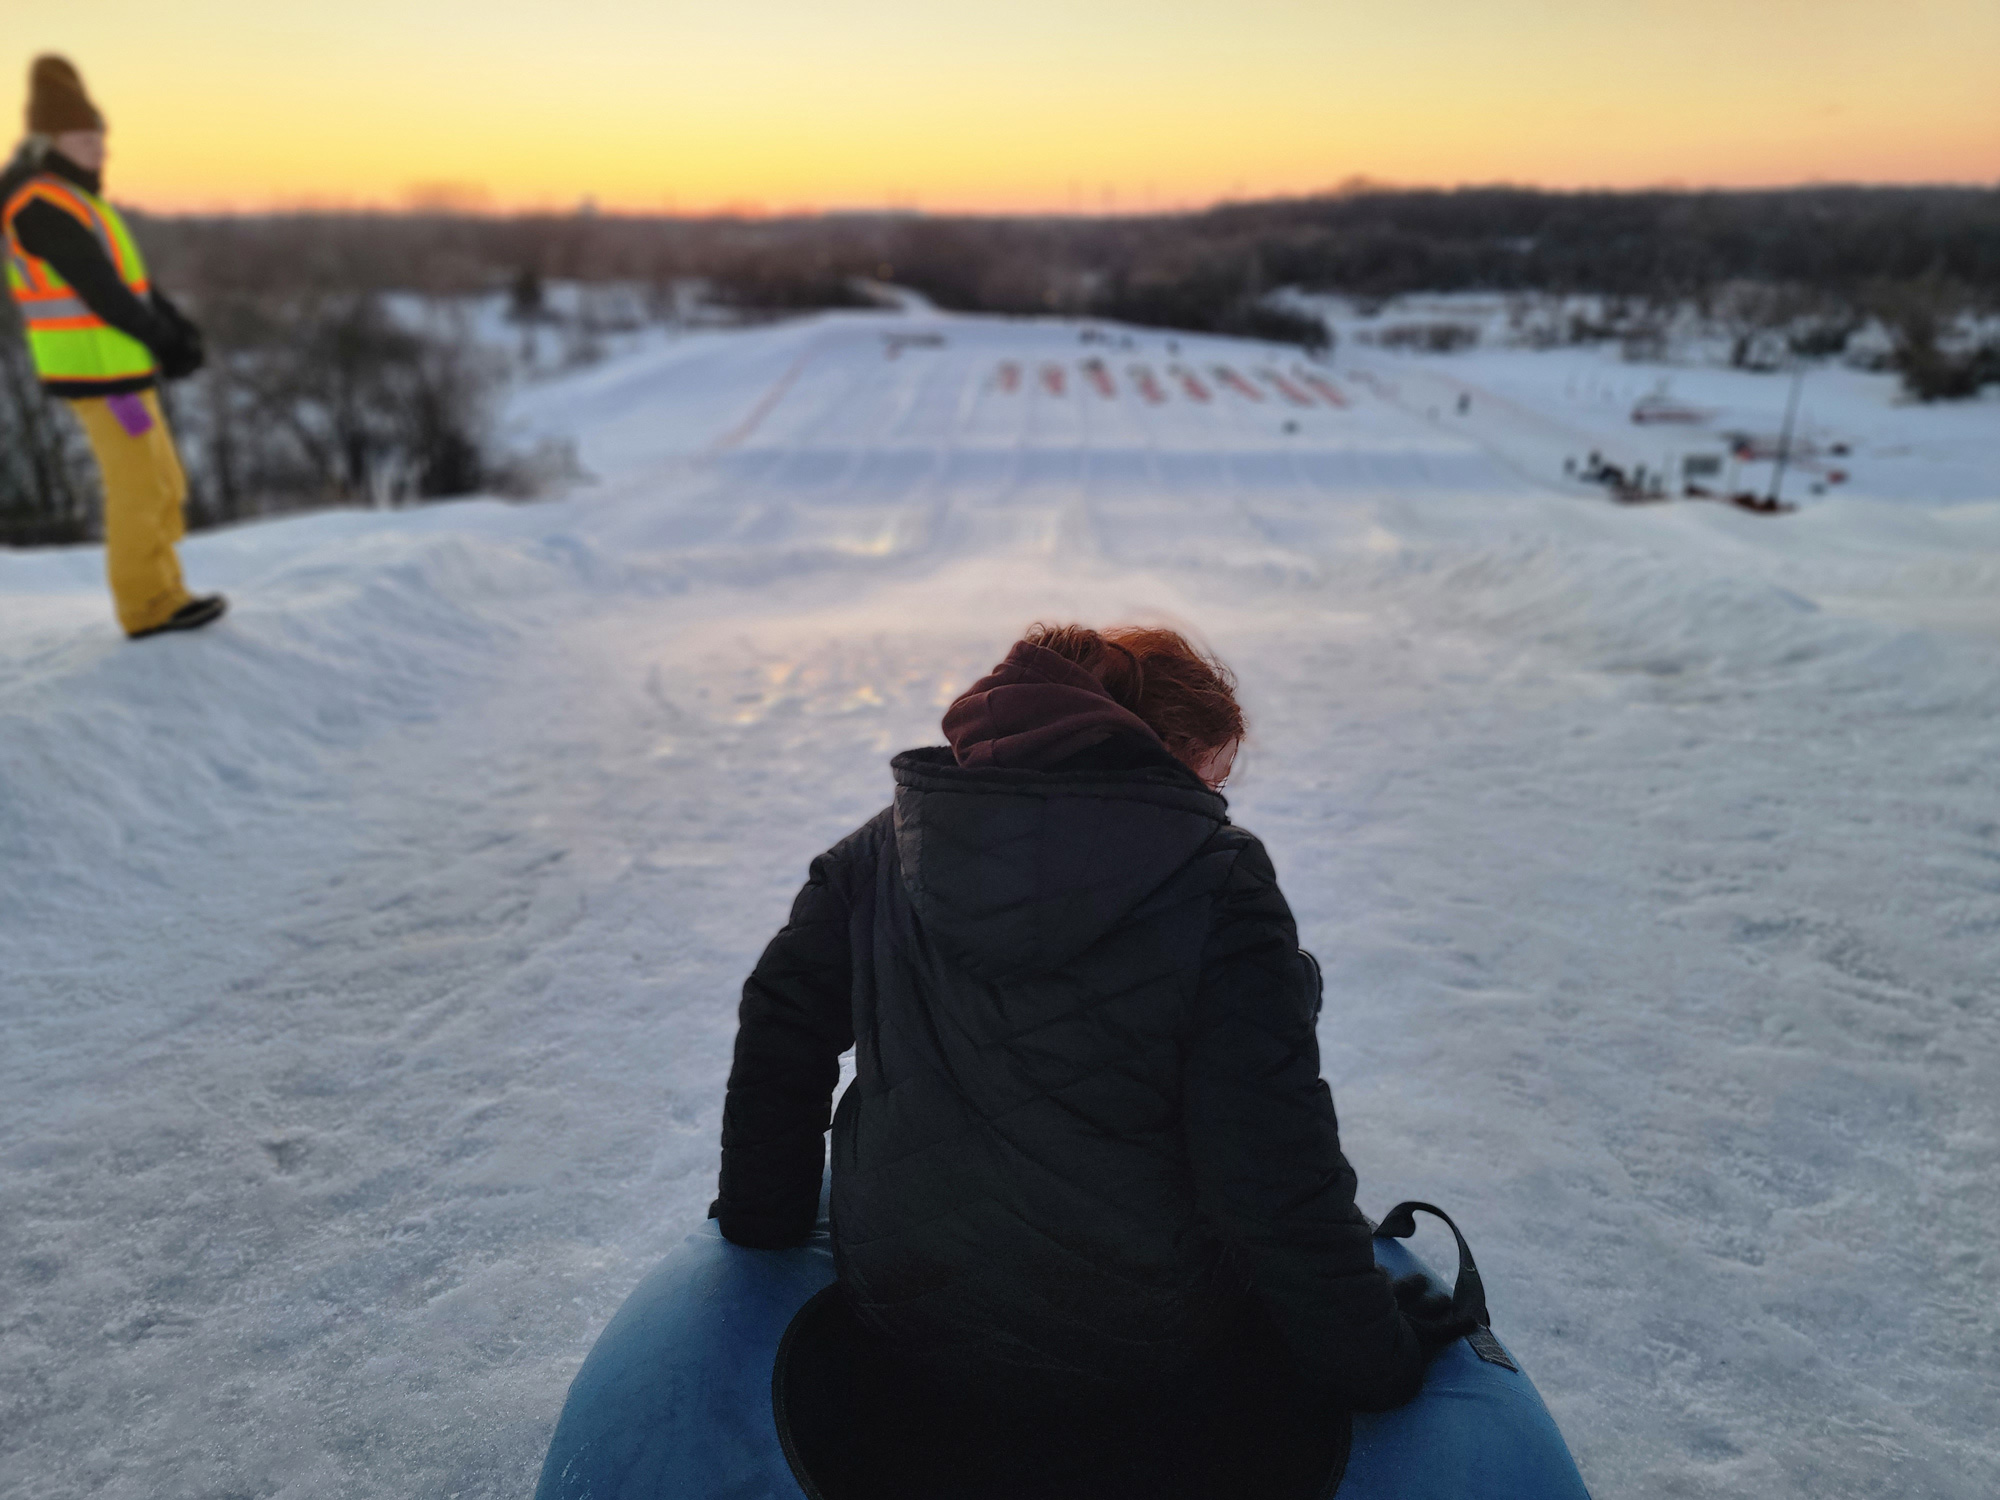 A young woman with red hair is on a slide going down a snowy hill on a sled